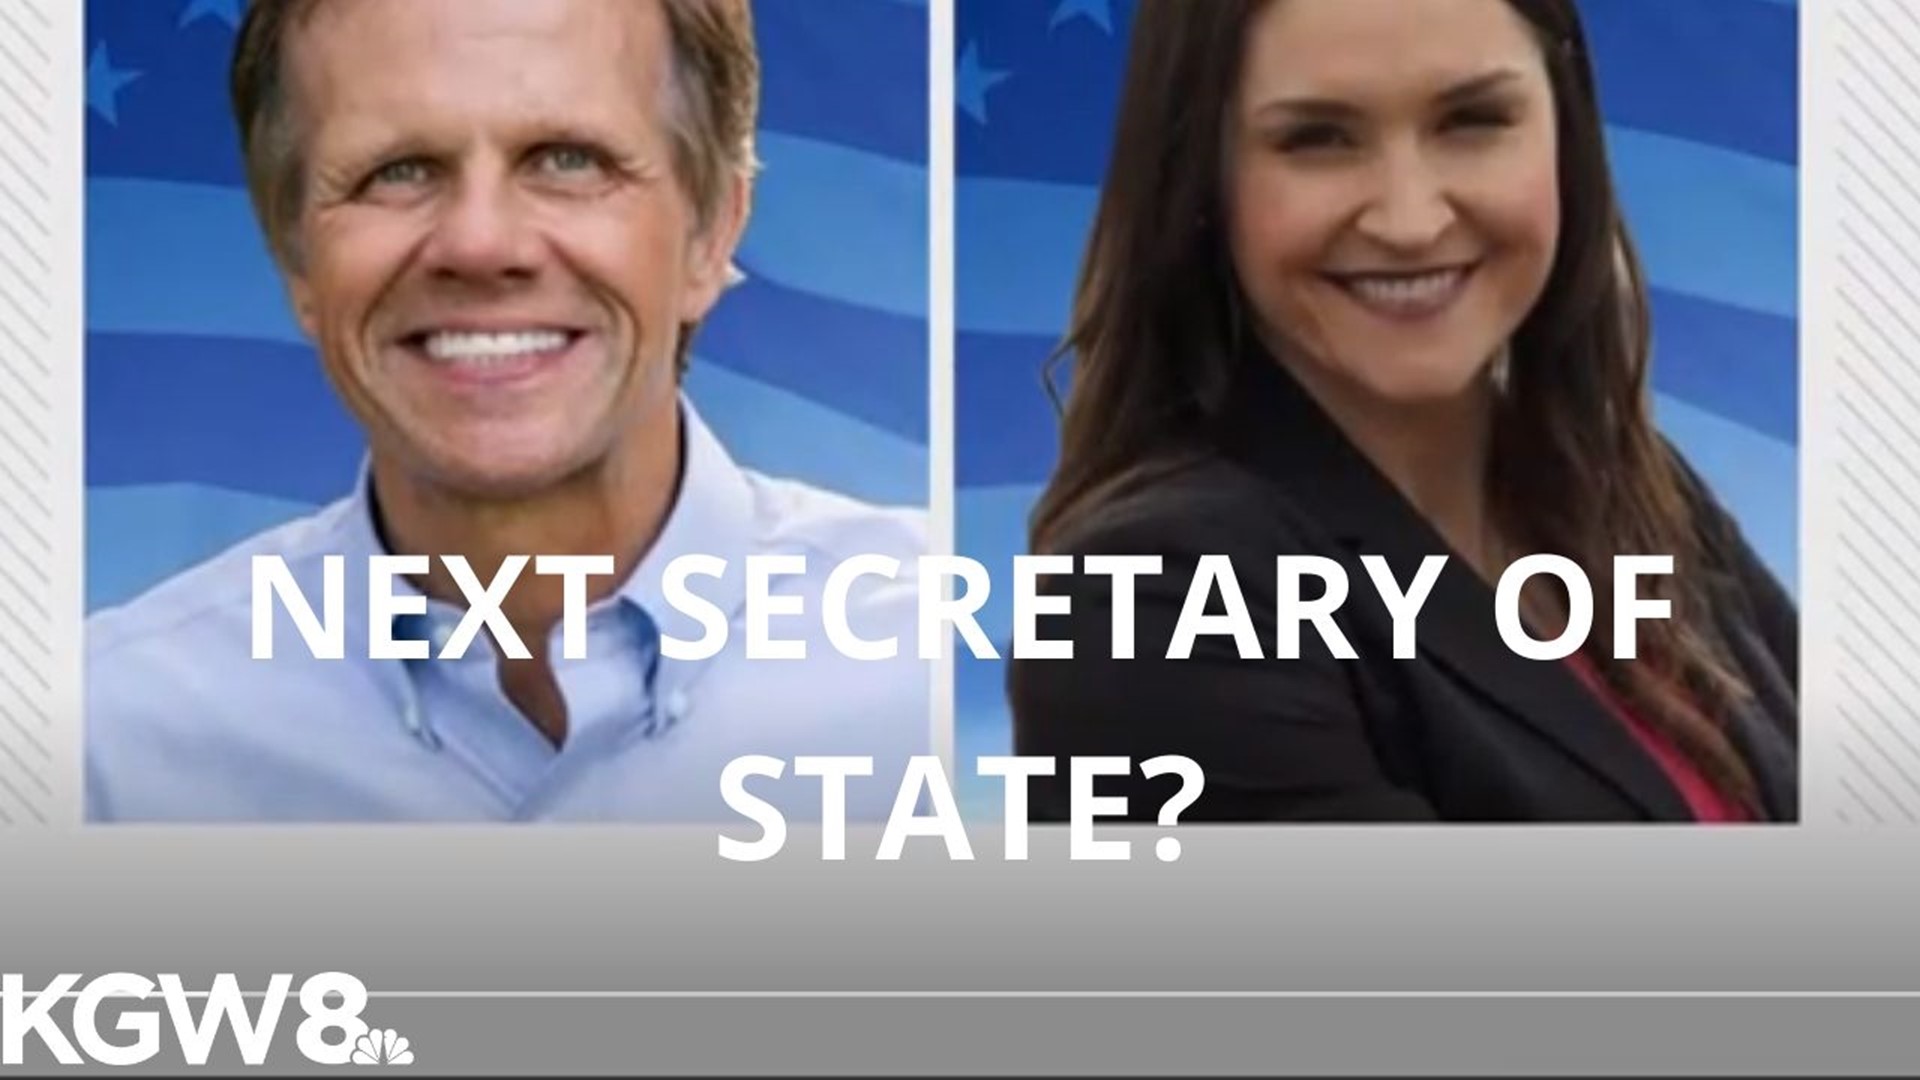 The race for Oregon's Secretary of State is still too close to call. Veteran state lawmakers Mark Hass and Shemia Fagan have been flip-flopping leads since.